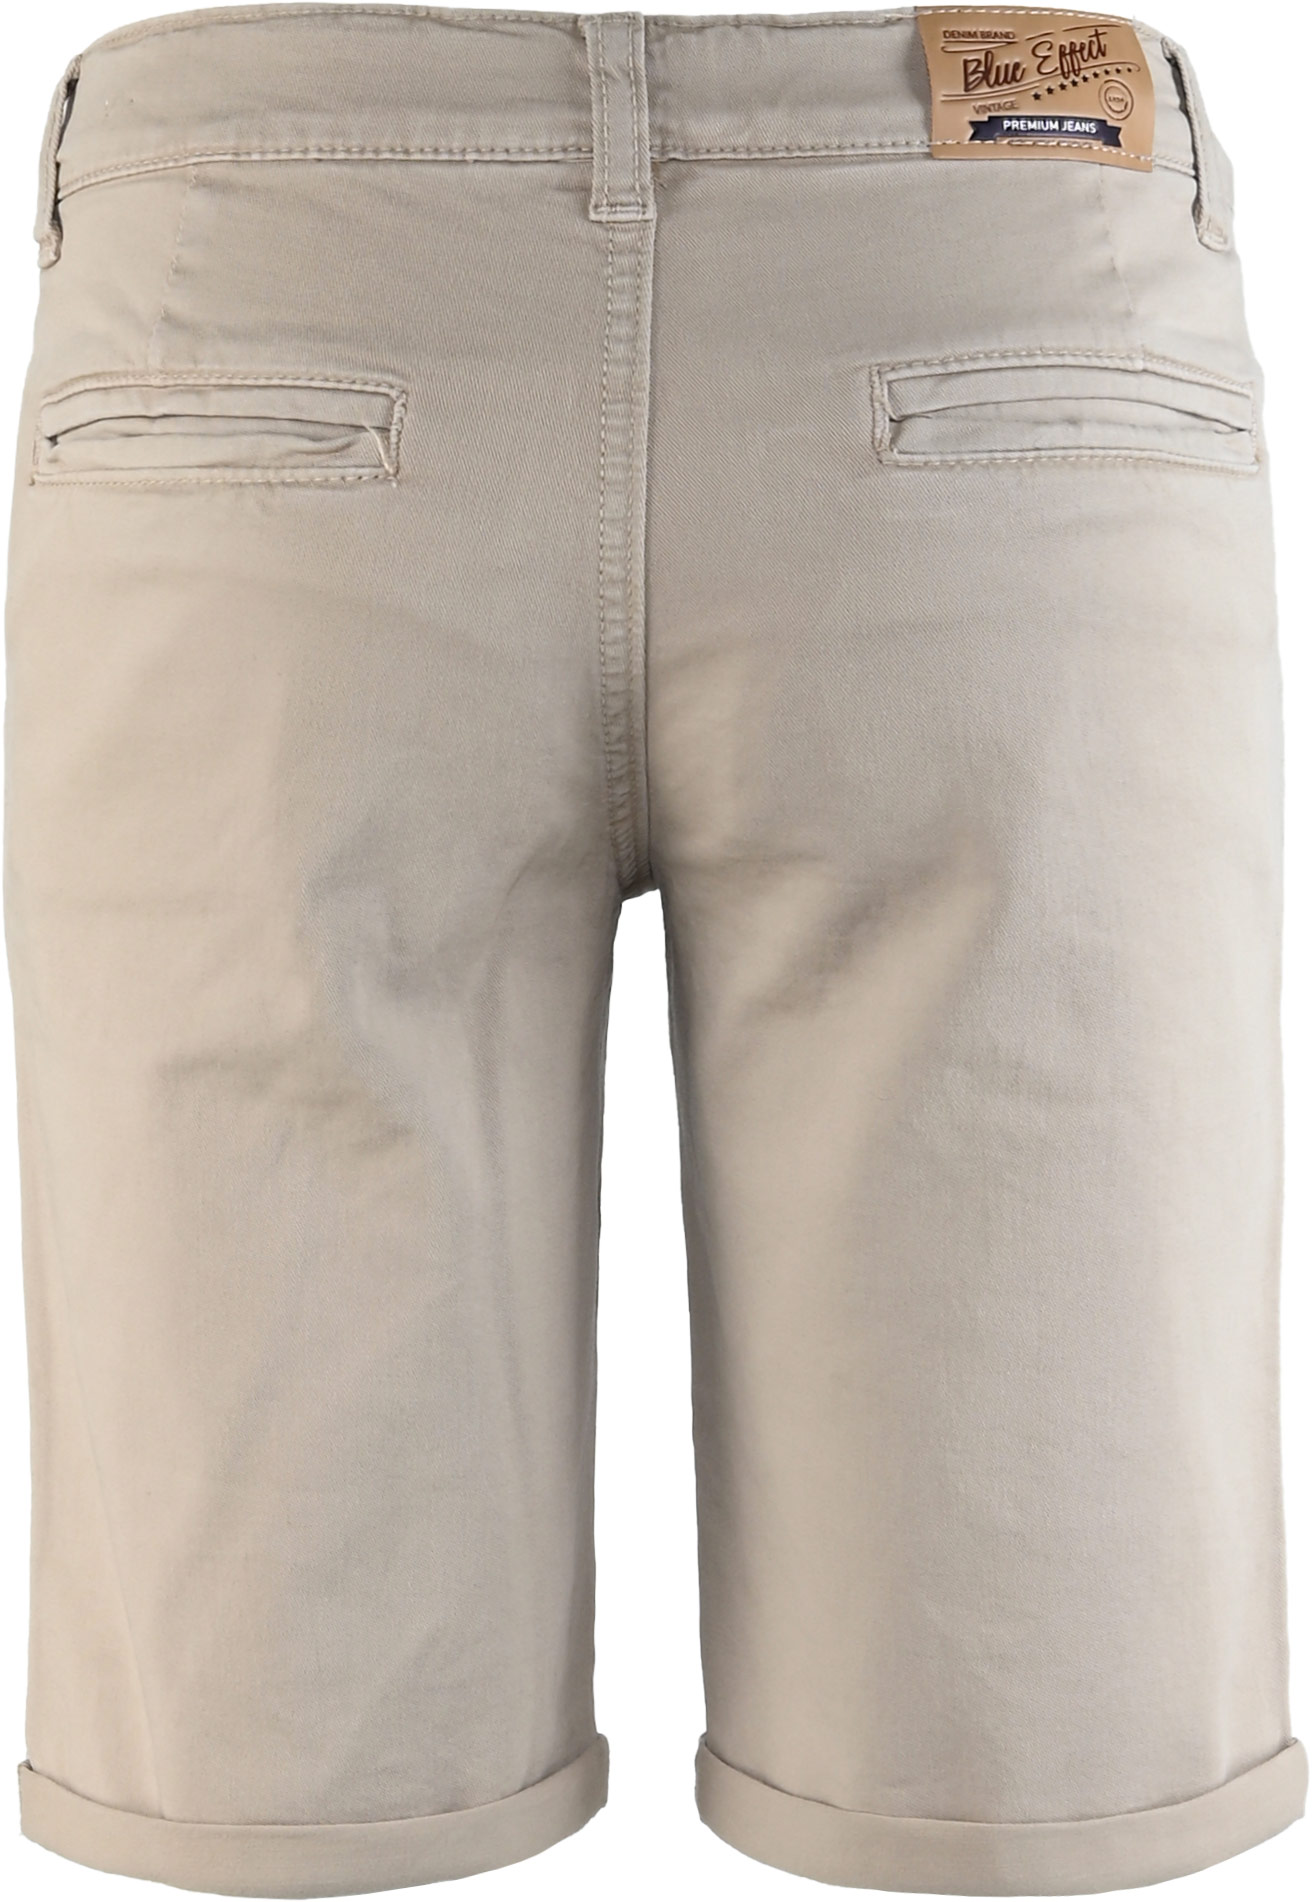 4278-Boys Chino Short available in Slim,Normal